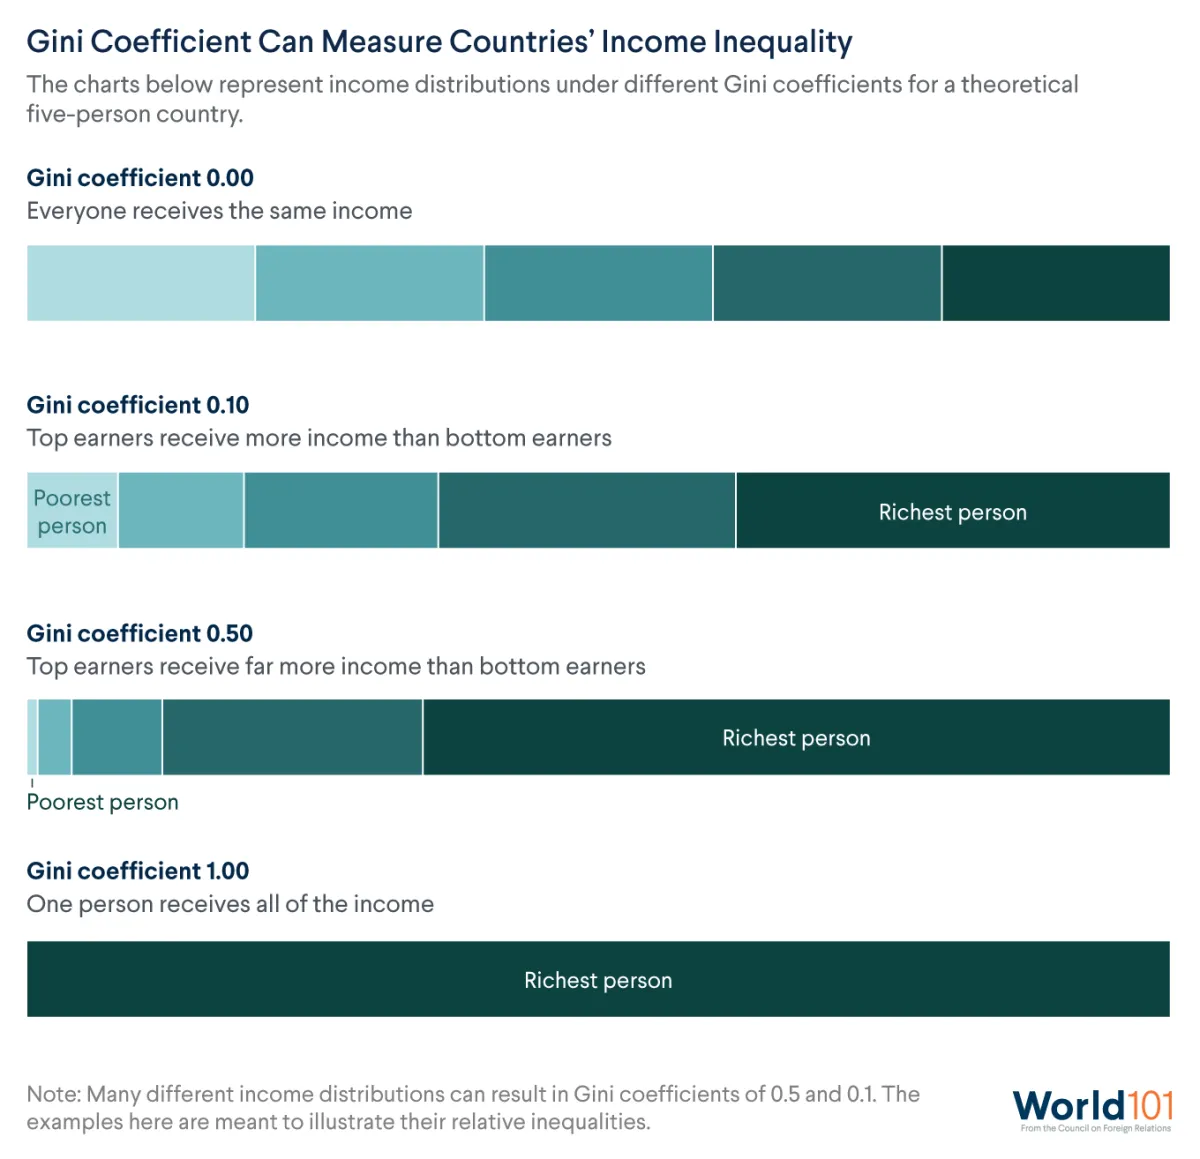 Gini Coefficient Can Measure Countries' Income Inequality